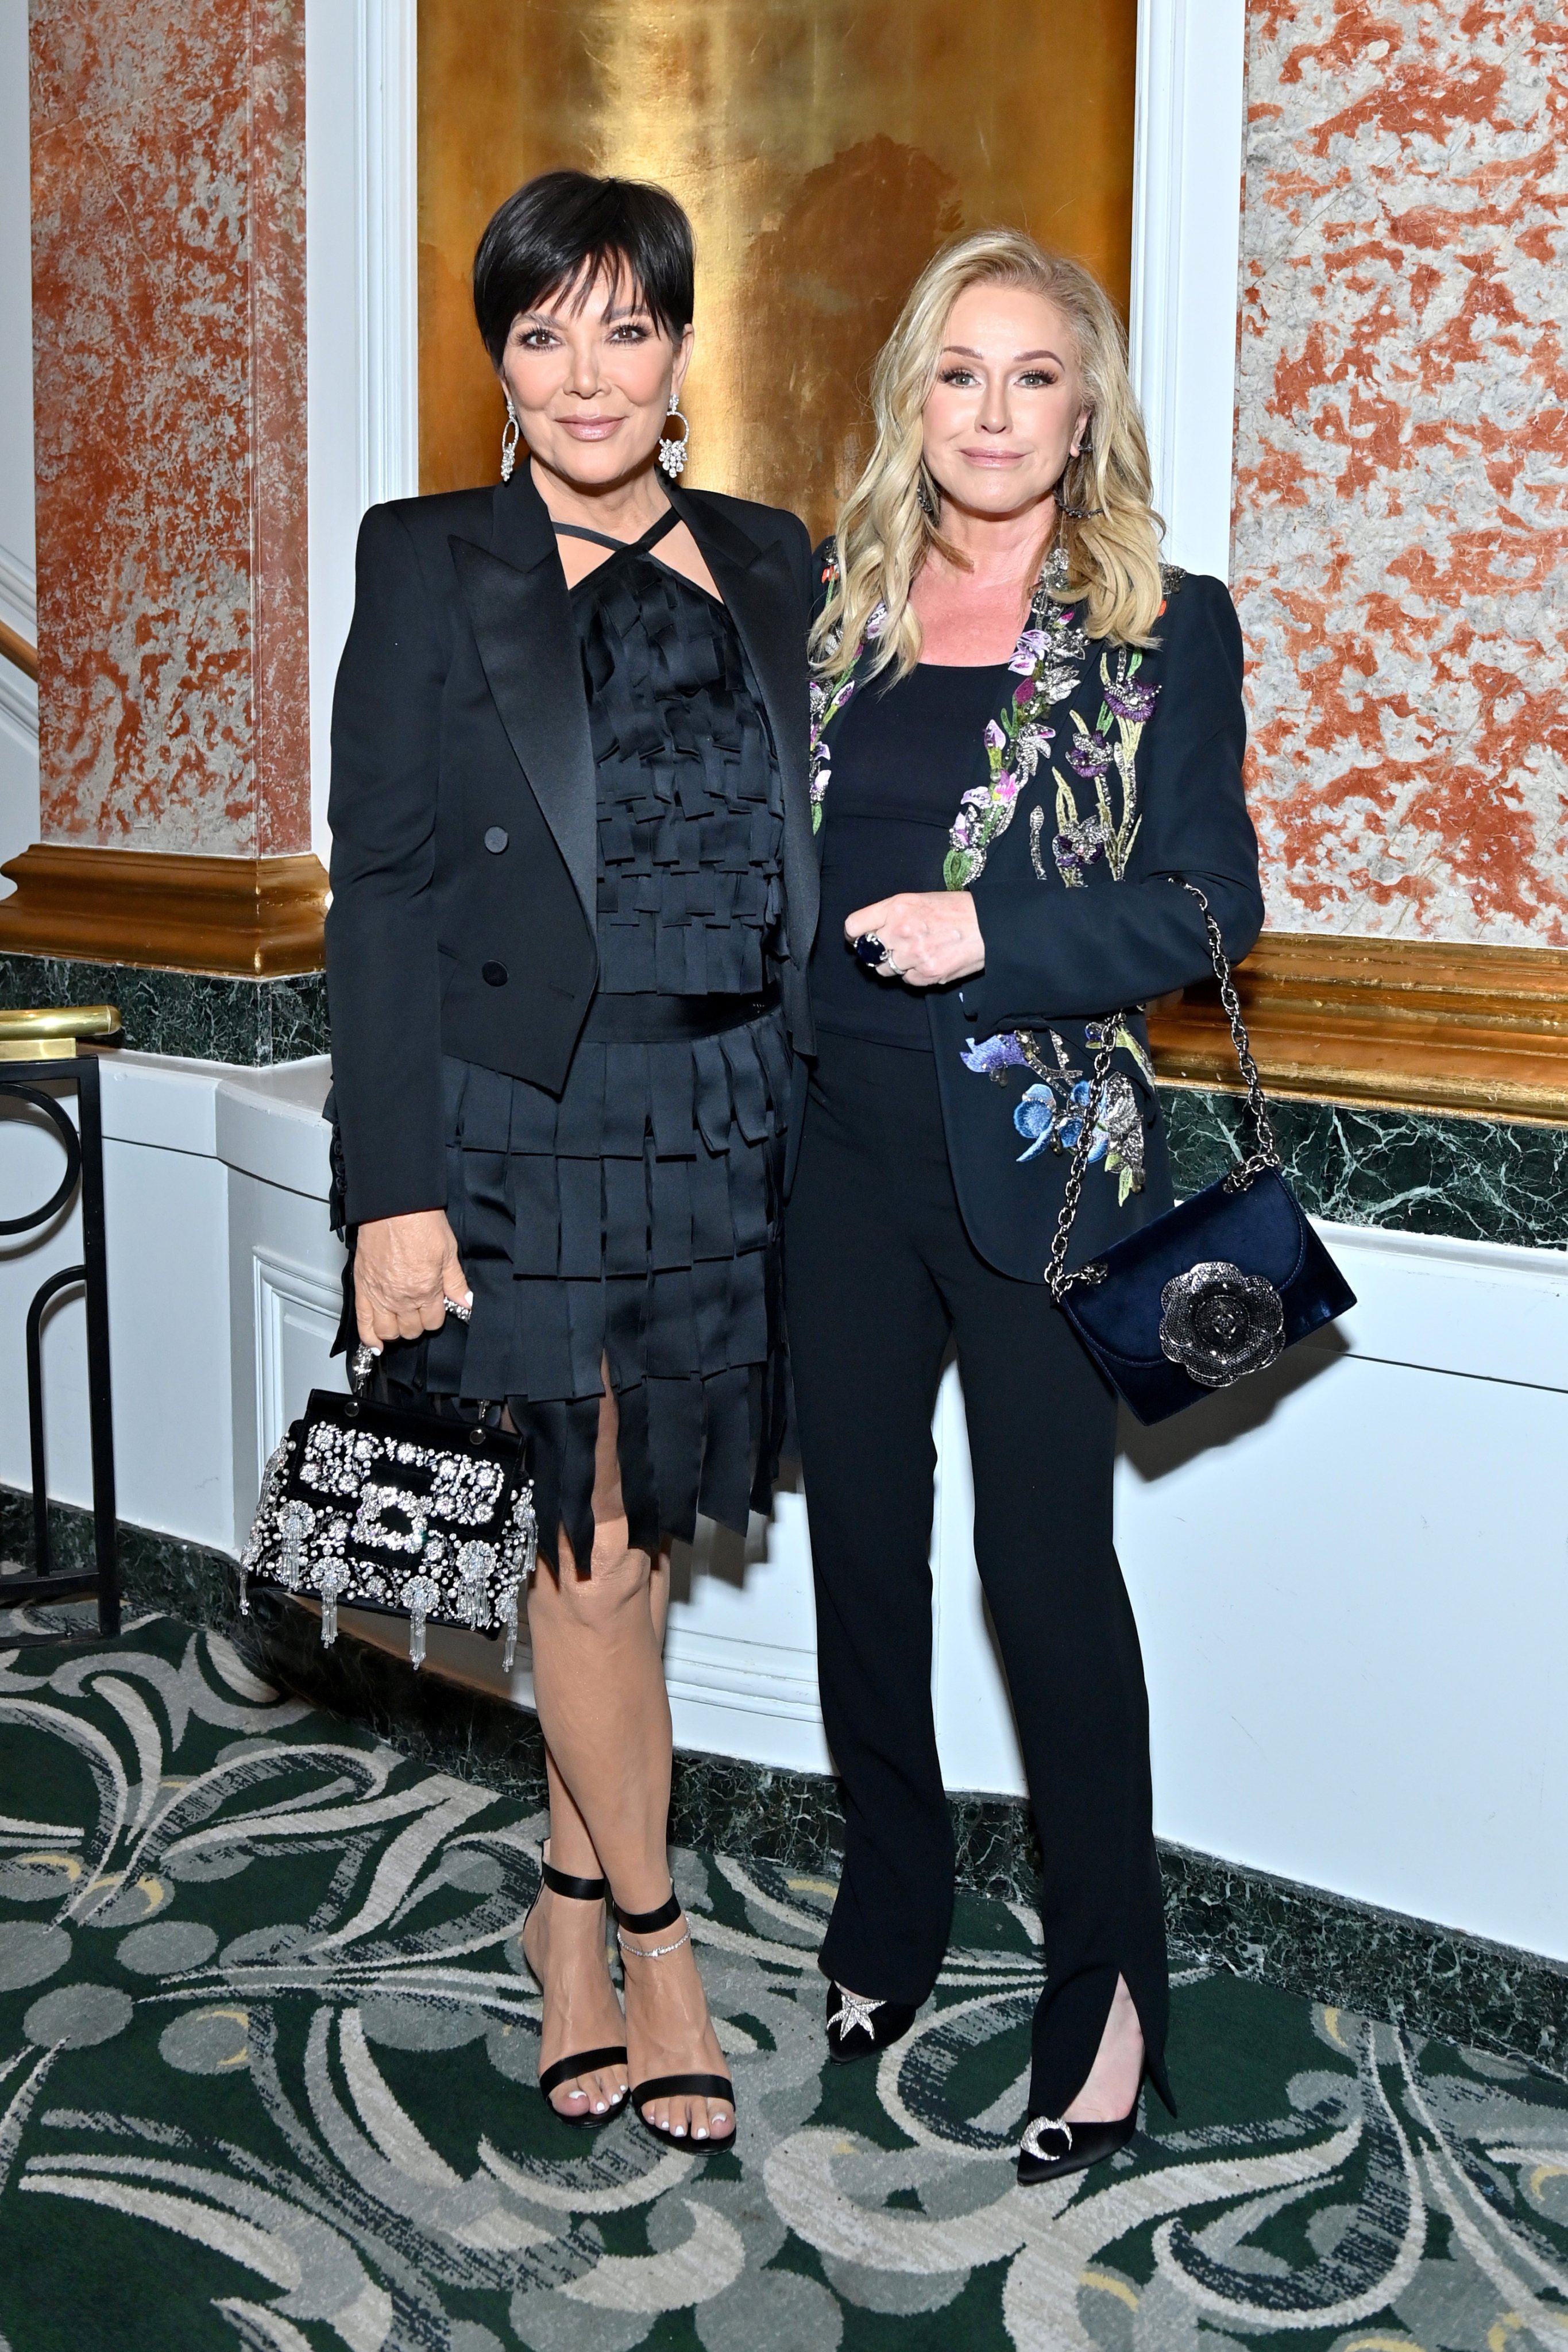 Kris Jenner and Kathy Hilton have been friends for decades, just like their daughters. Photo Getty Images